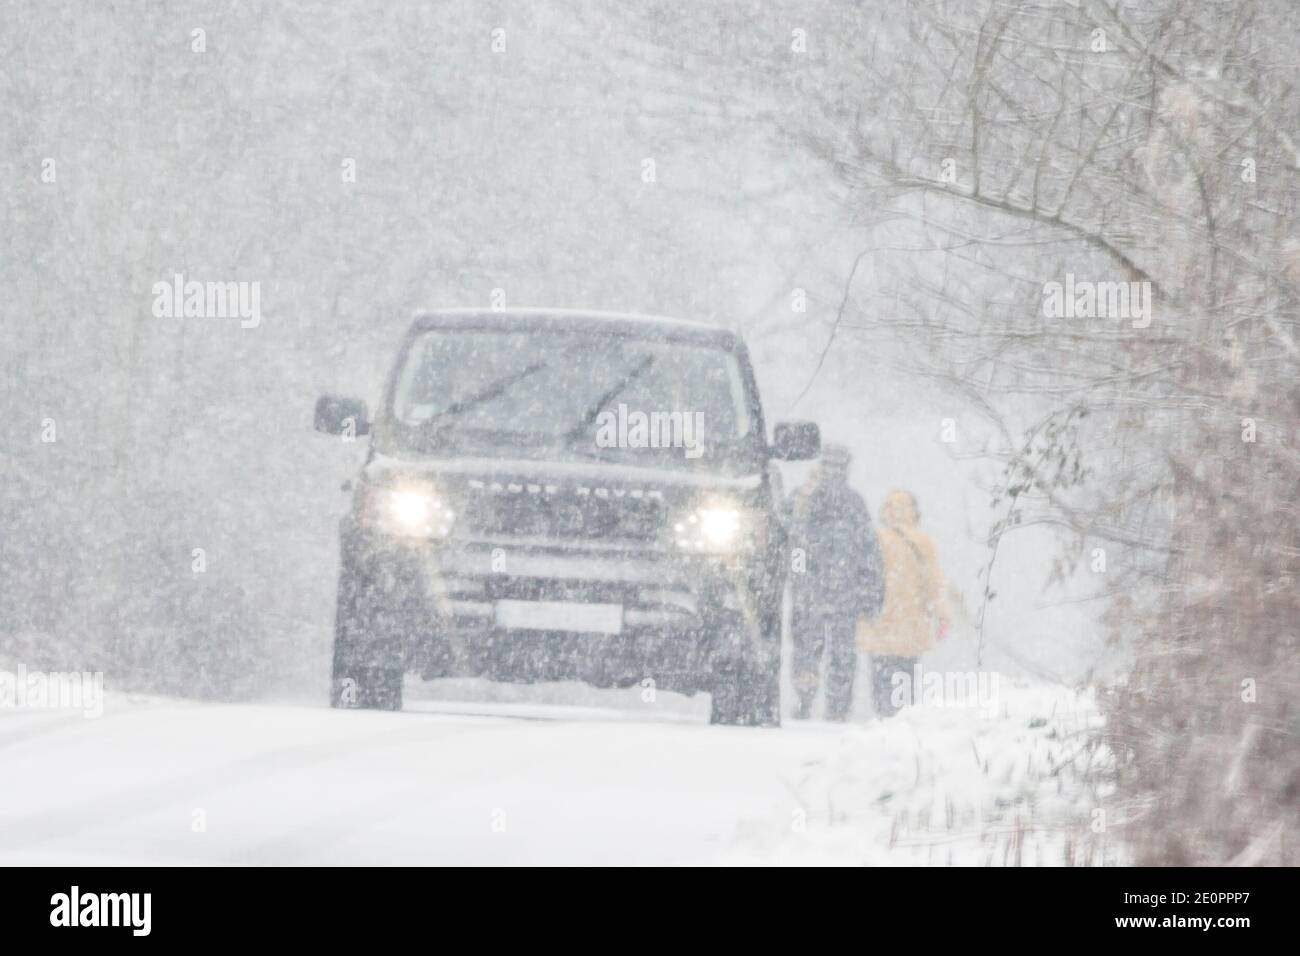 Kidderminster, UK. 2nd January, 2021. UK weather: with daytime temperatures failing to rise much above freezing across Worcestshire and roads already icy, Kidderminster is hit with heavy morning snow showers making driving conditions hazardous for motorists and pedestrians. Credit: Lee Hudson/Alamy Live News Stock Photo